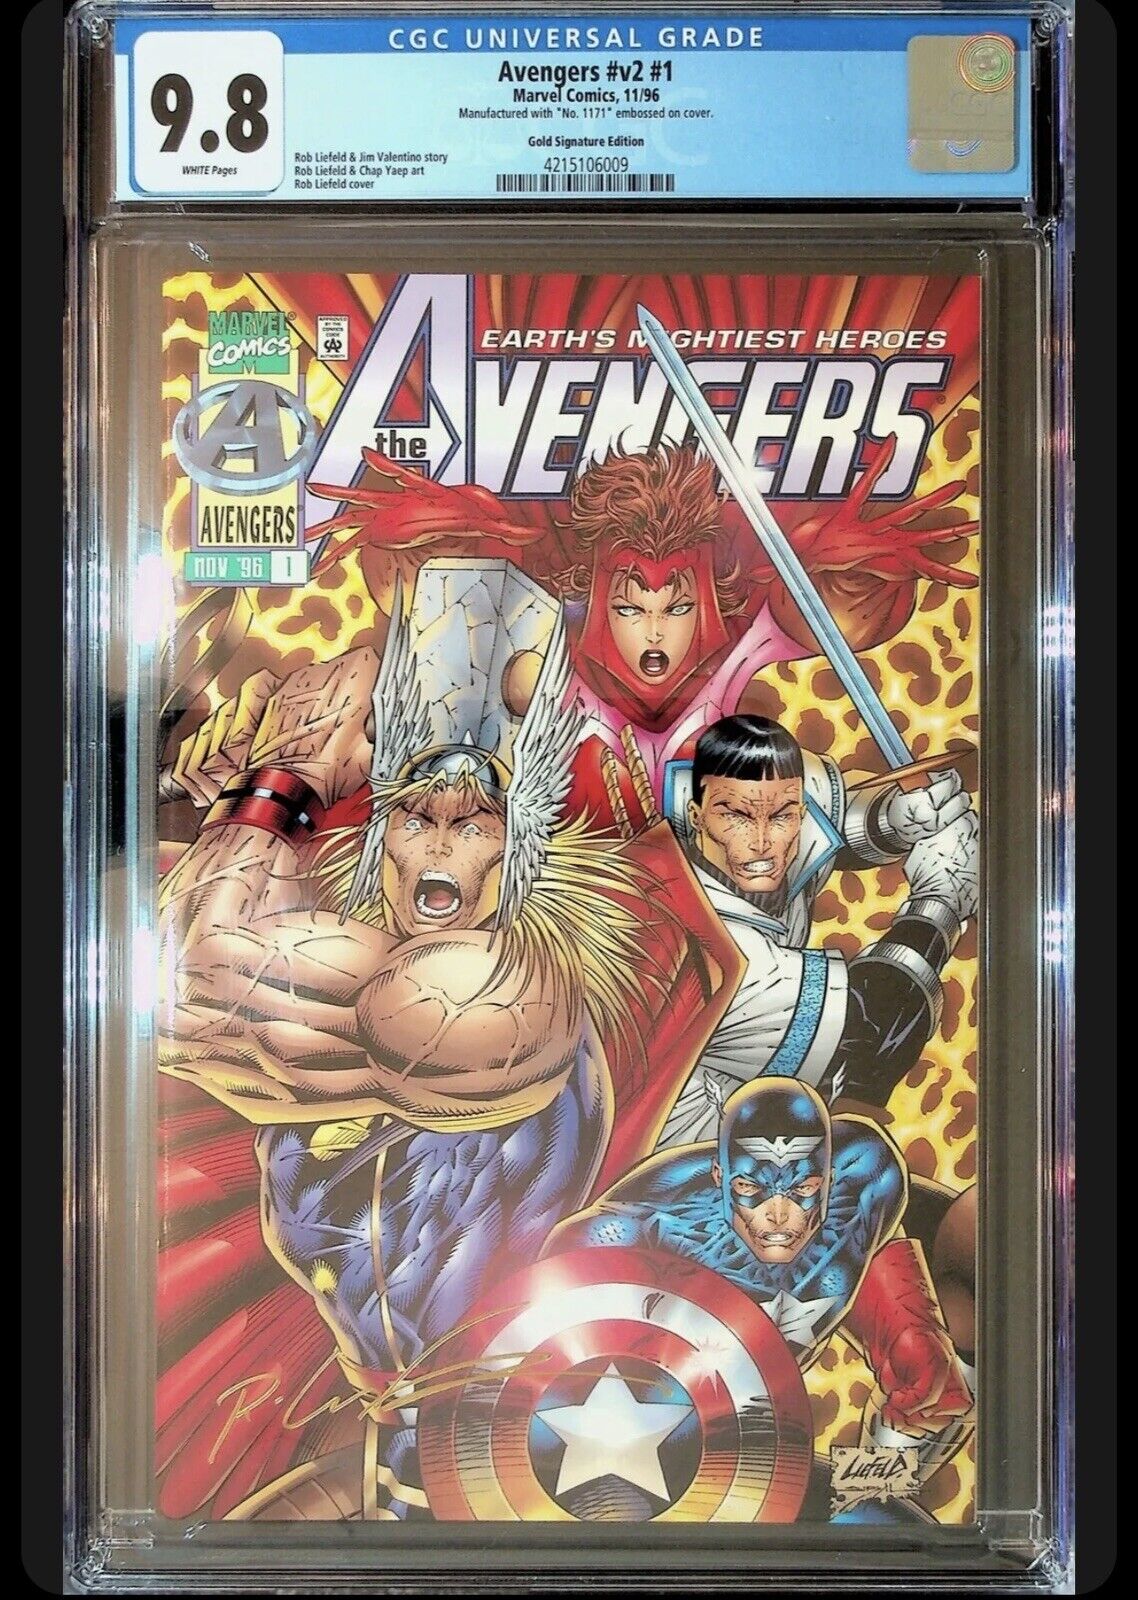 Avengers #v2 #1  CGC 9.8 NM White Pages Gold Signature Edition Rob Liefeld Rare